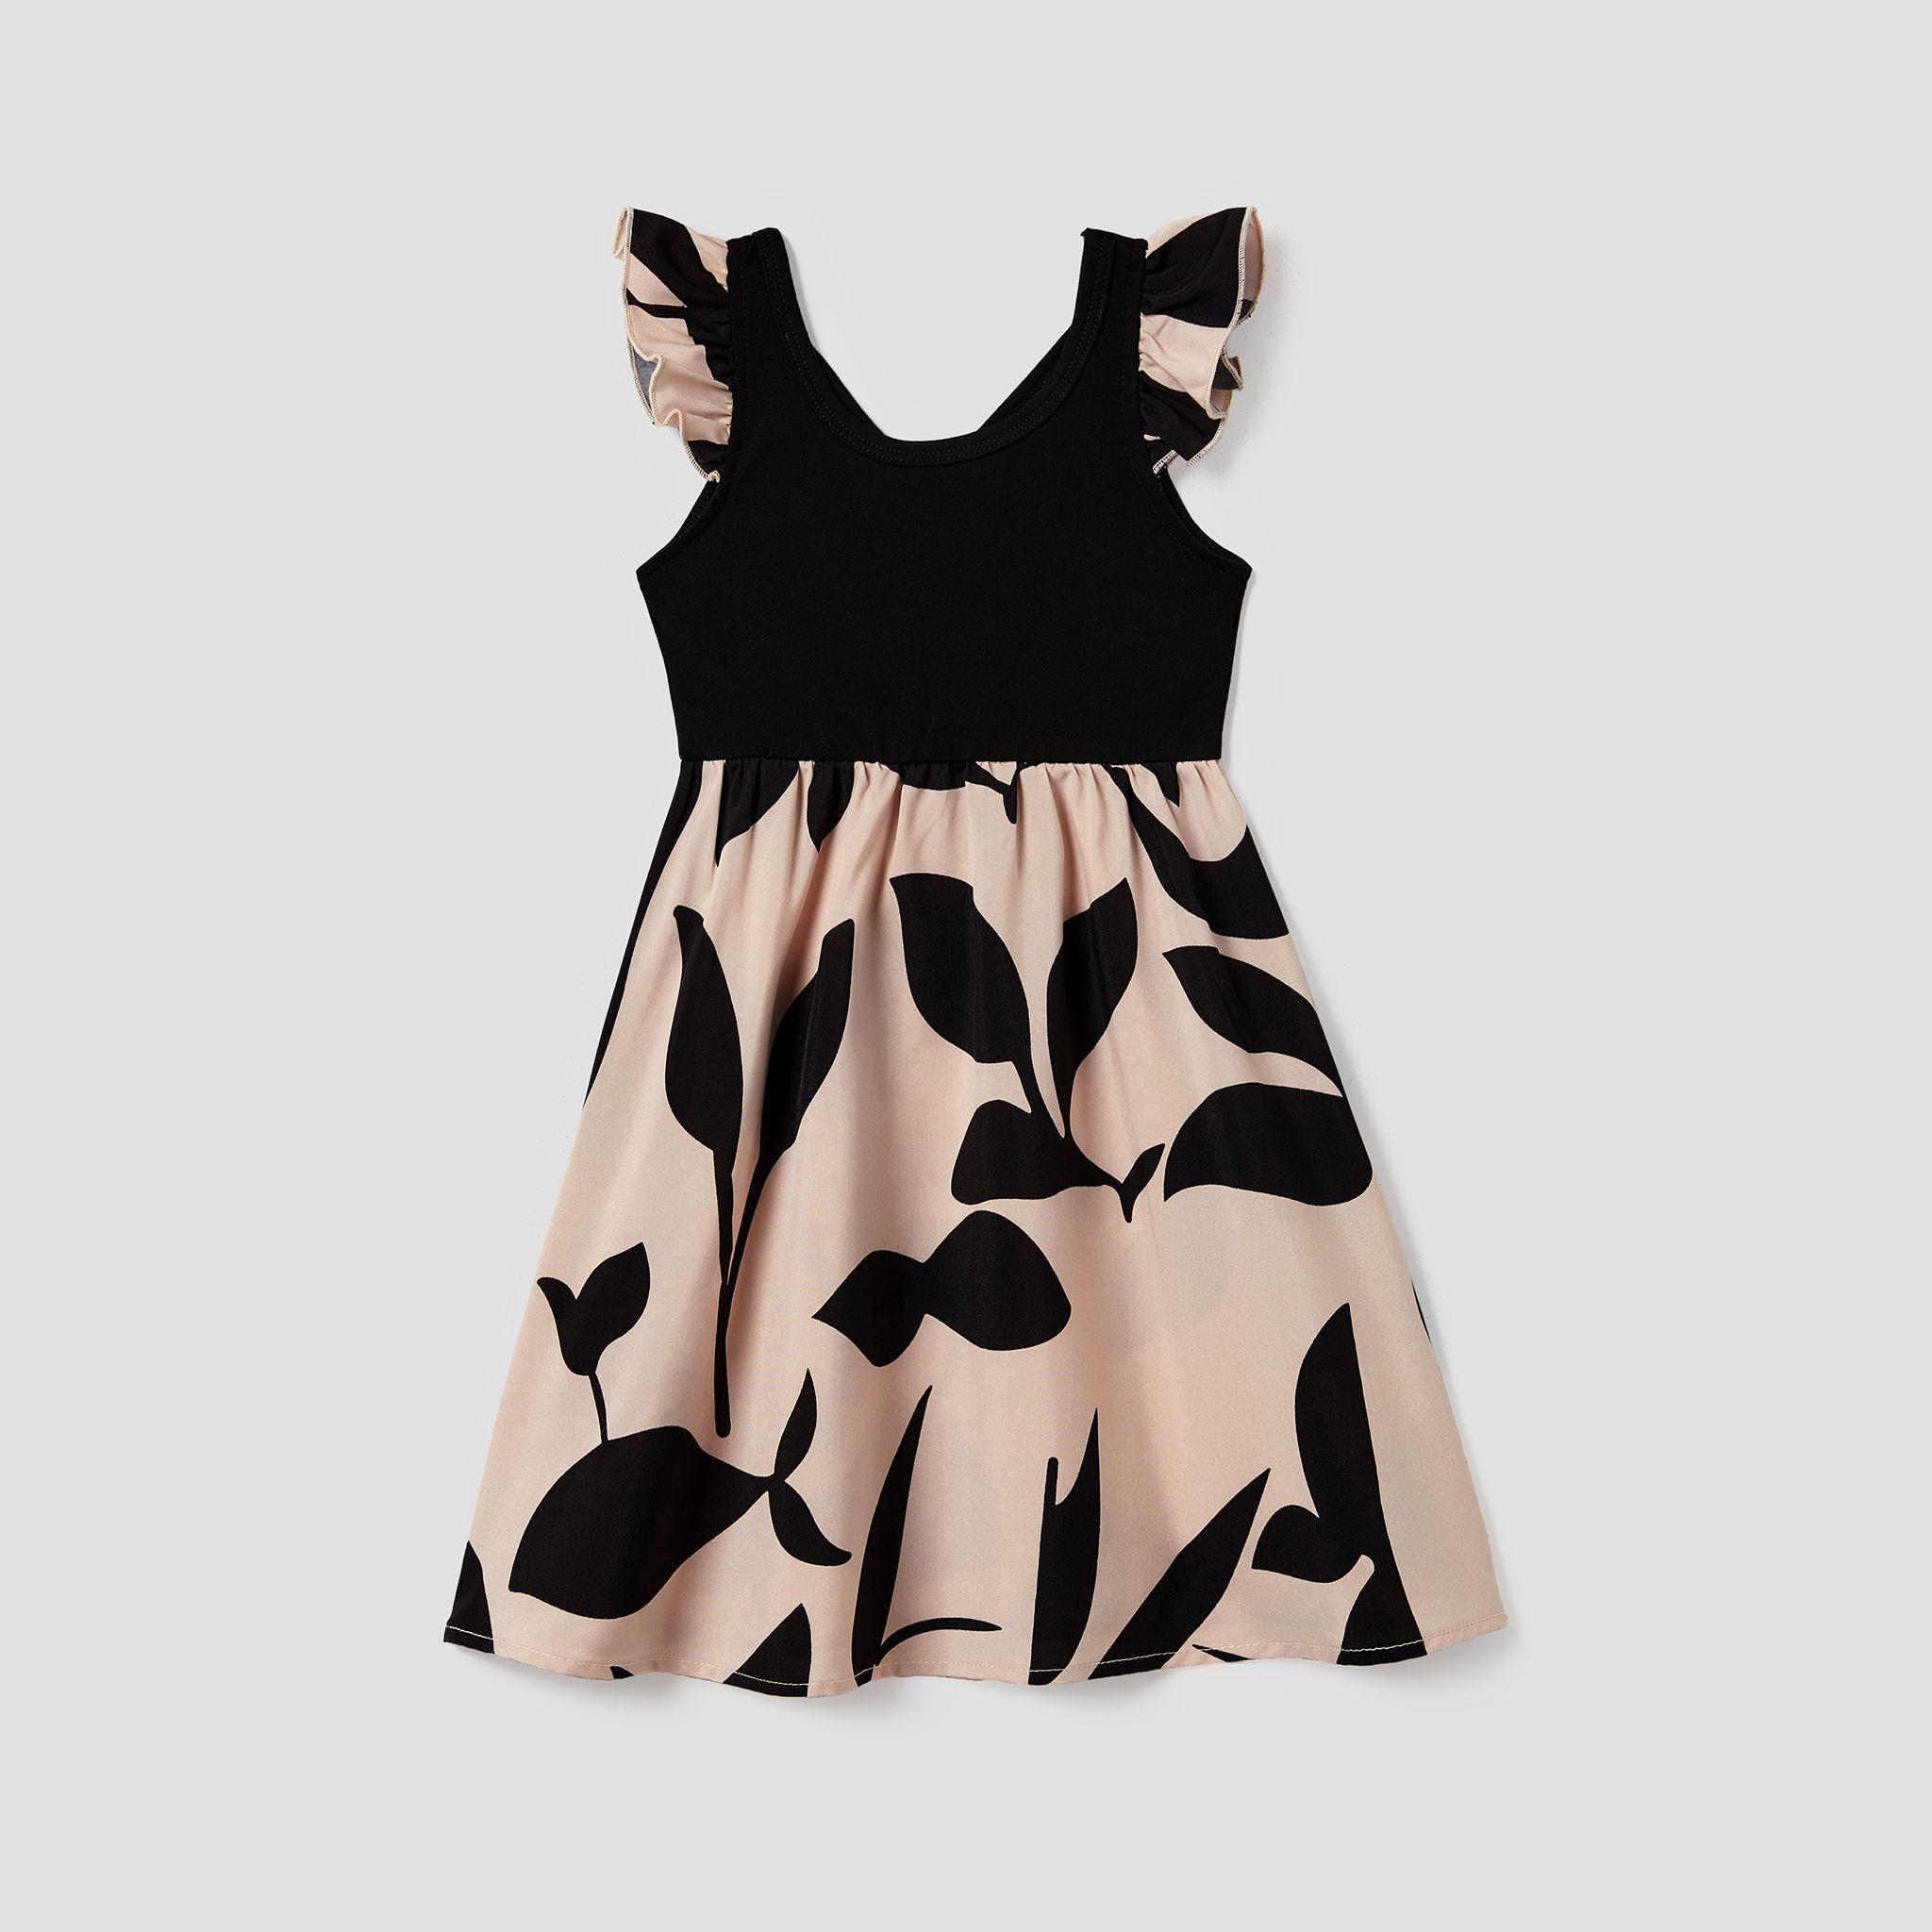 Family Matching Cross Back Floral Strap Dress And Colorblock Top Sets